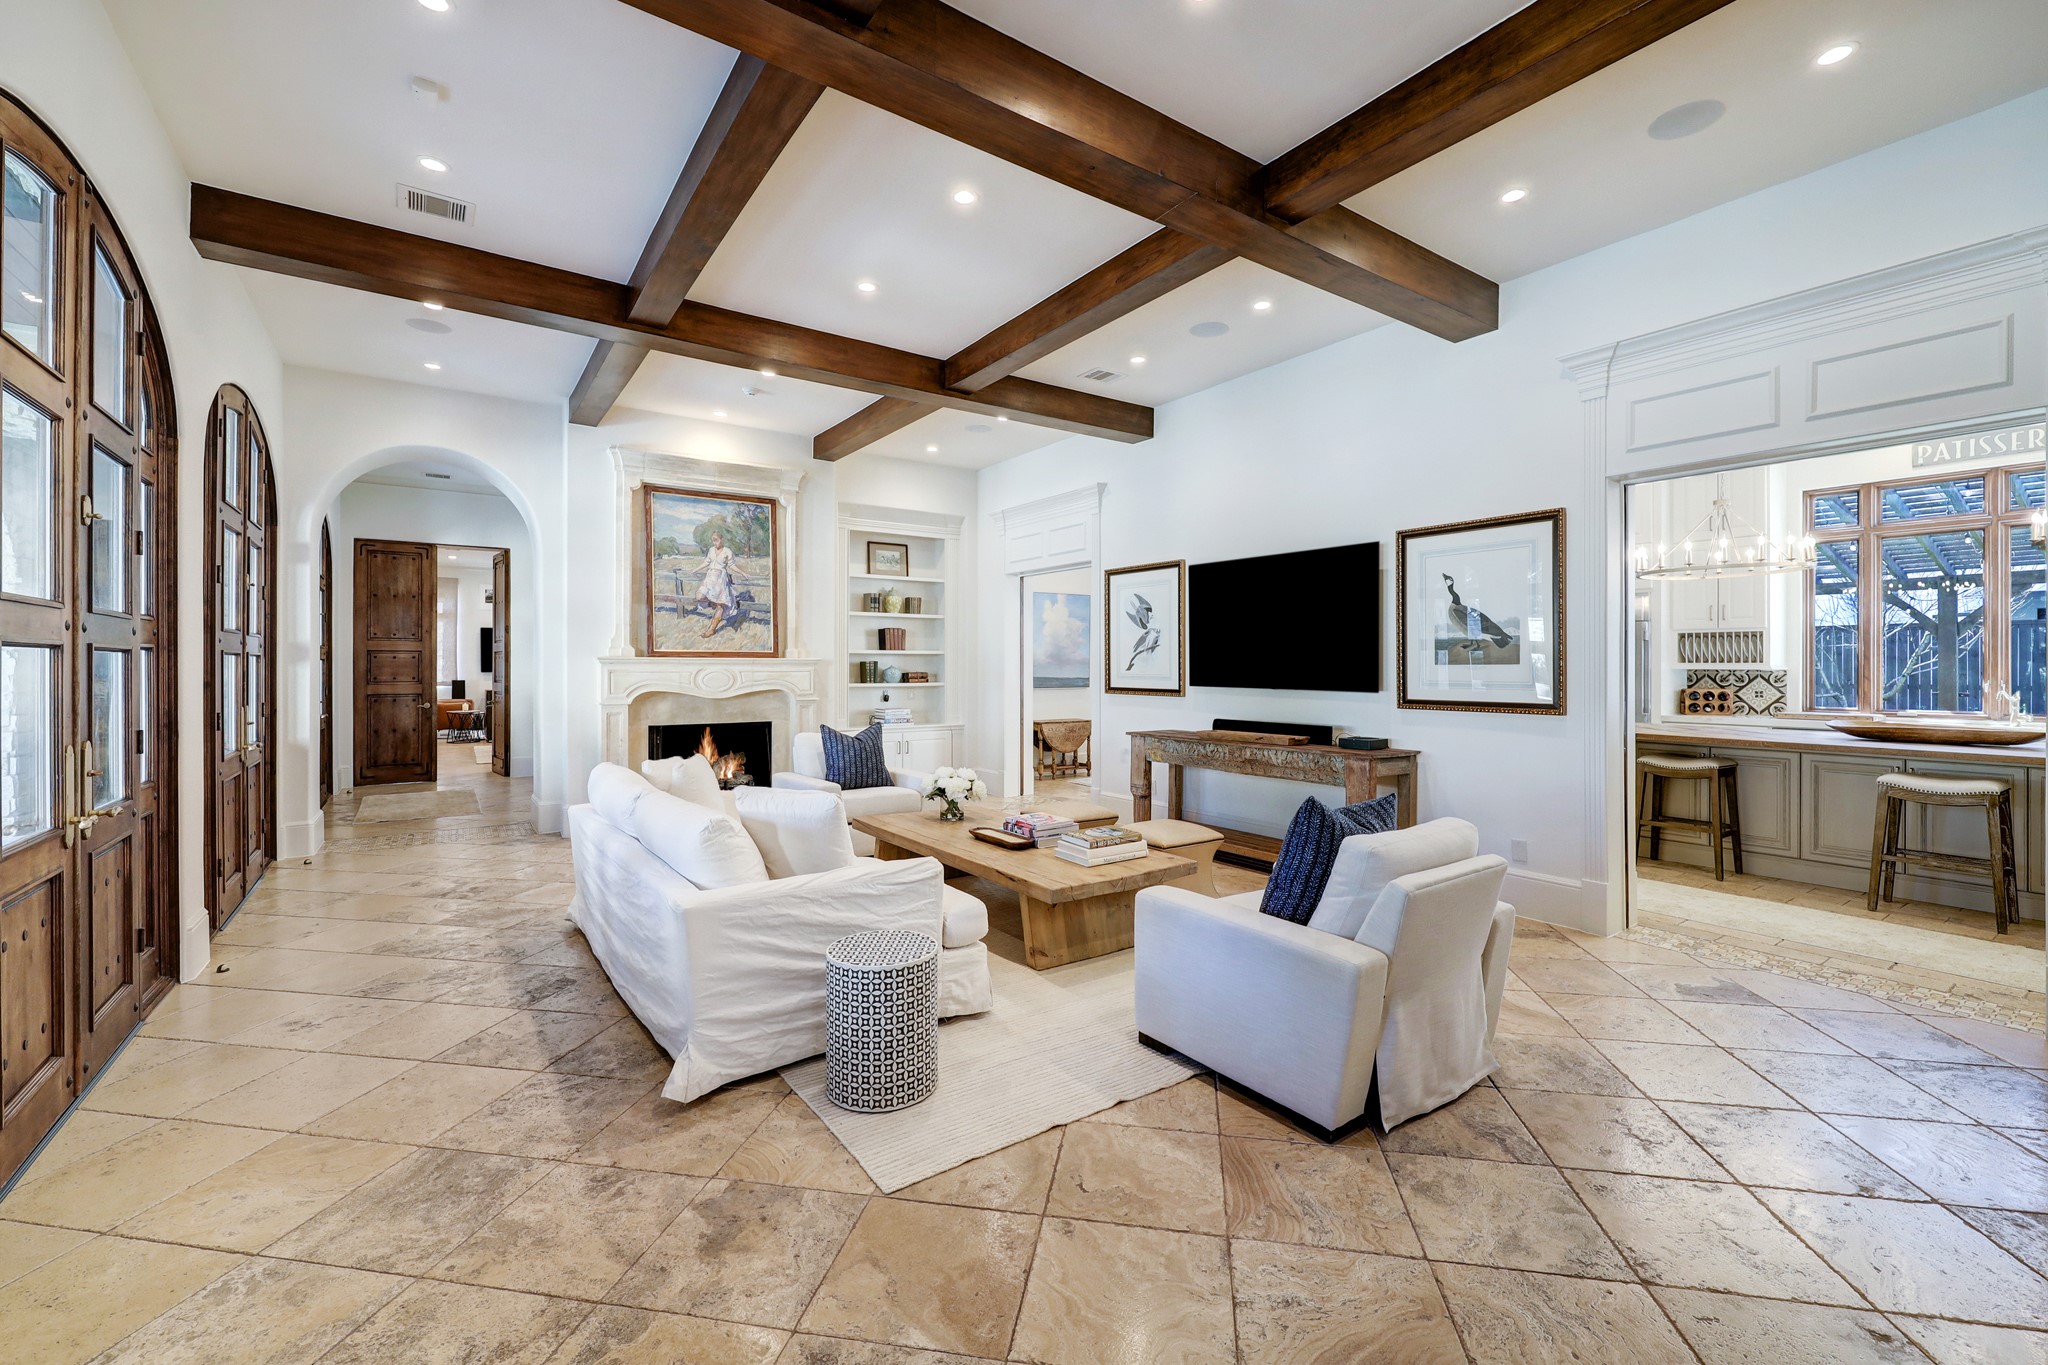 With a central location and impressive 12-foot ceilings, this space is enhanced by operable French doors that open up to the pool area. It also showcases convenient built-in bookcases, ceiling speakers, and elegant limestone floors.